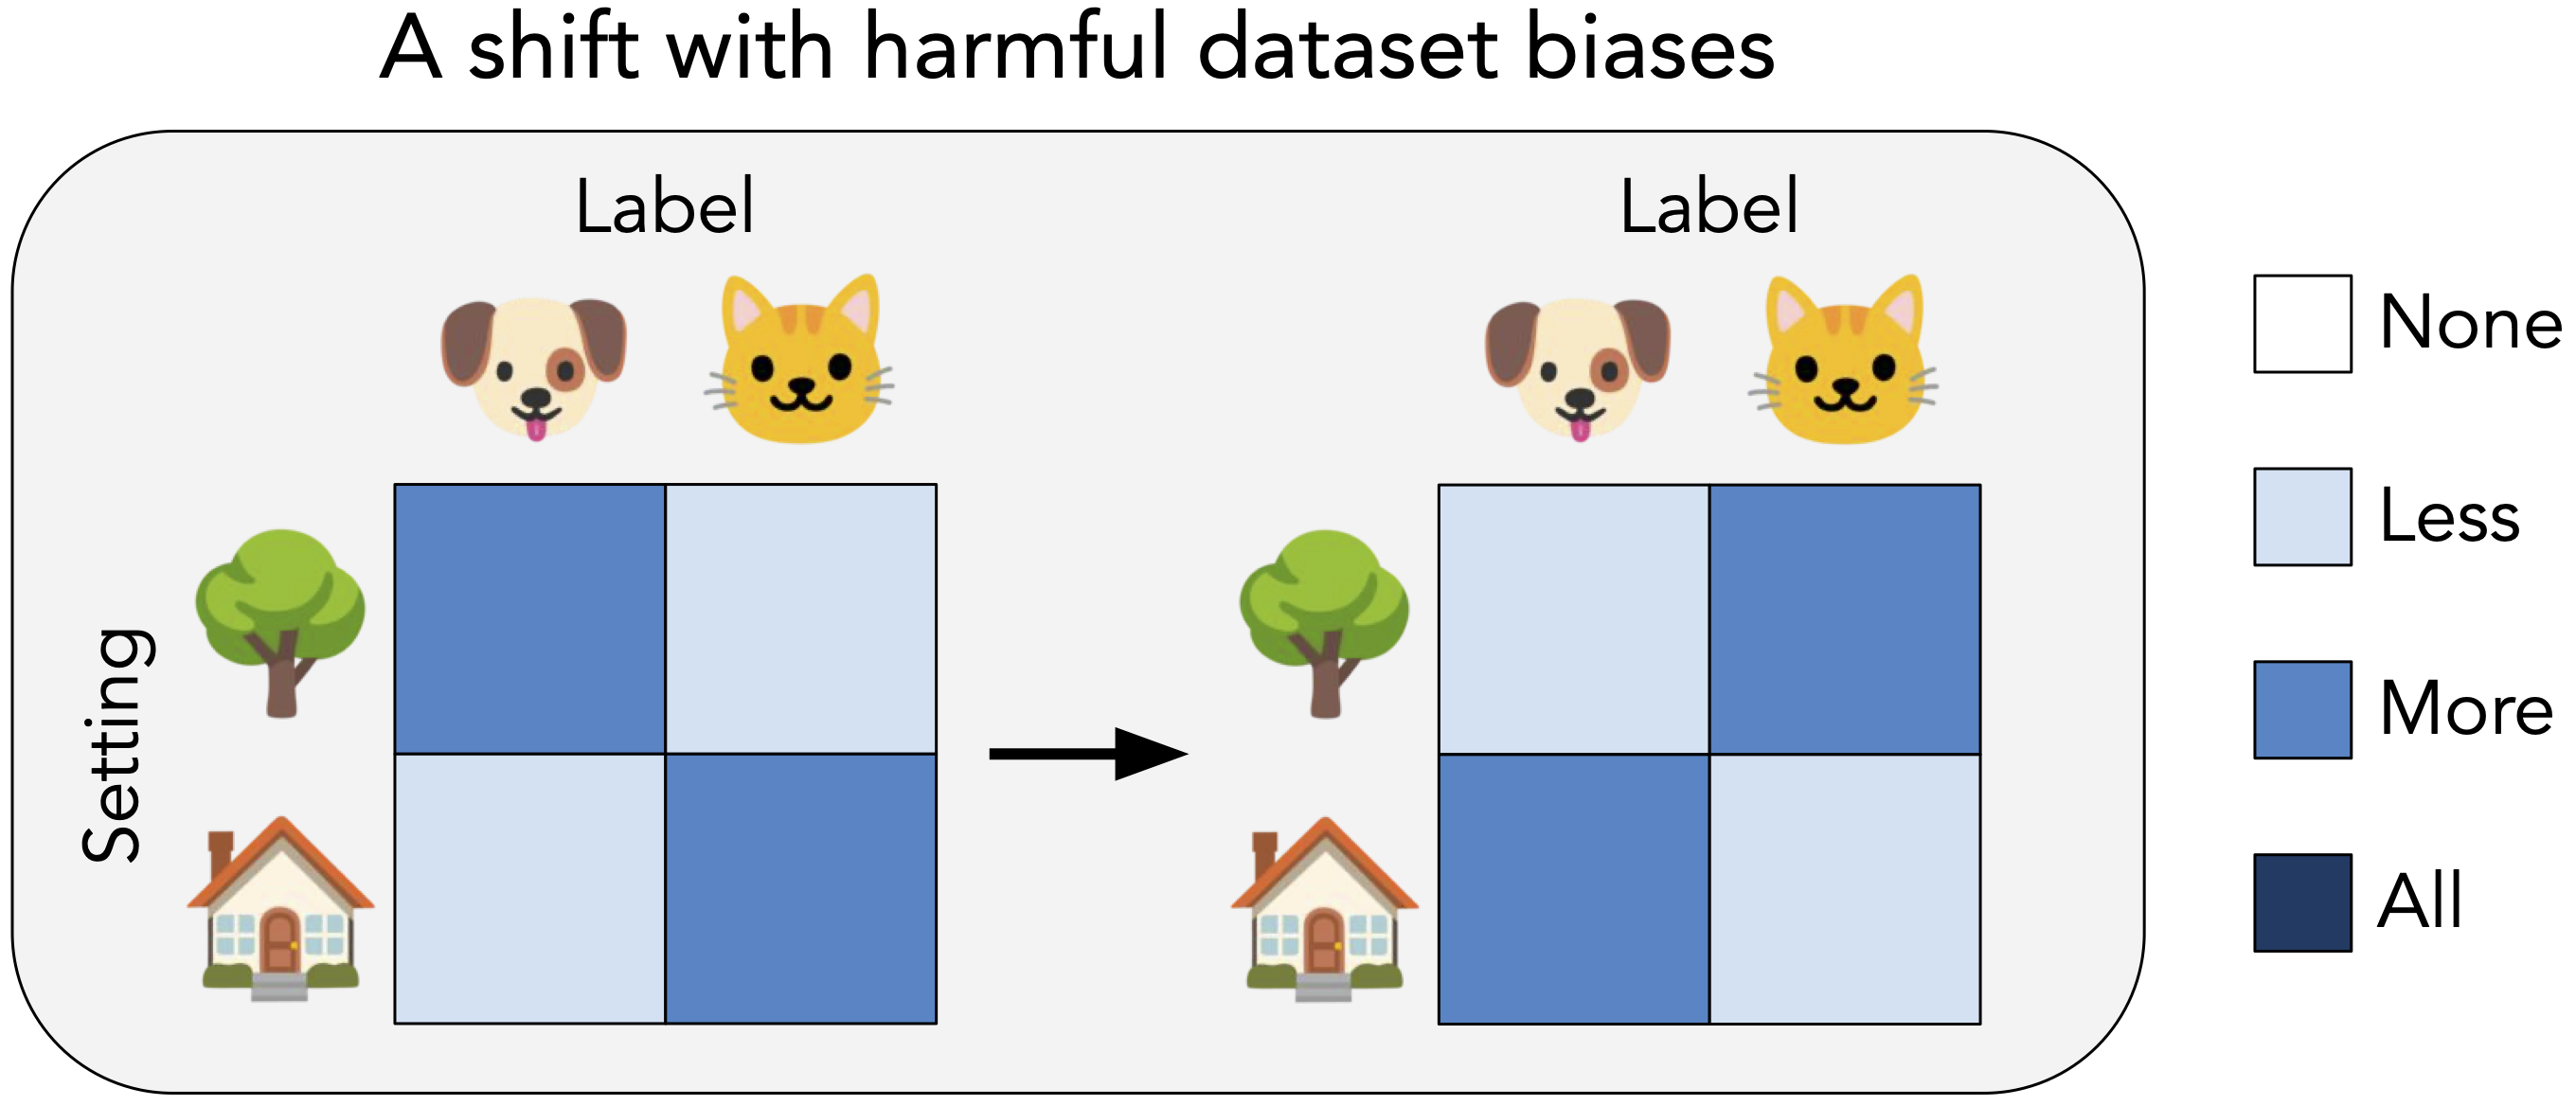 An illustration of a shift with harmful dataset biases